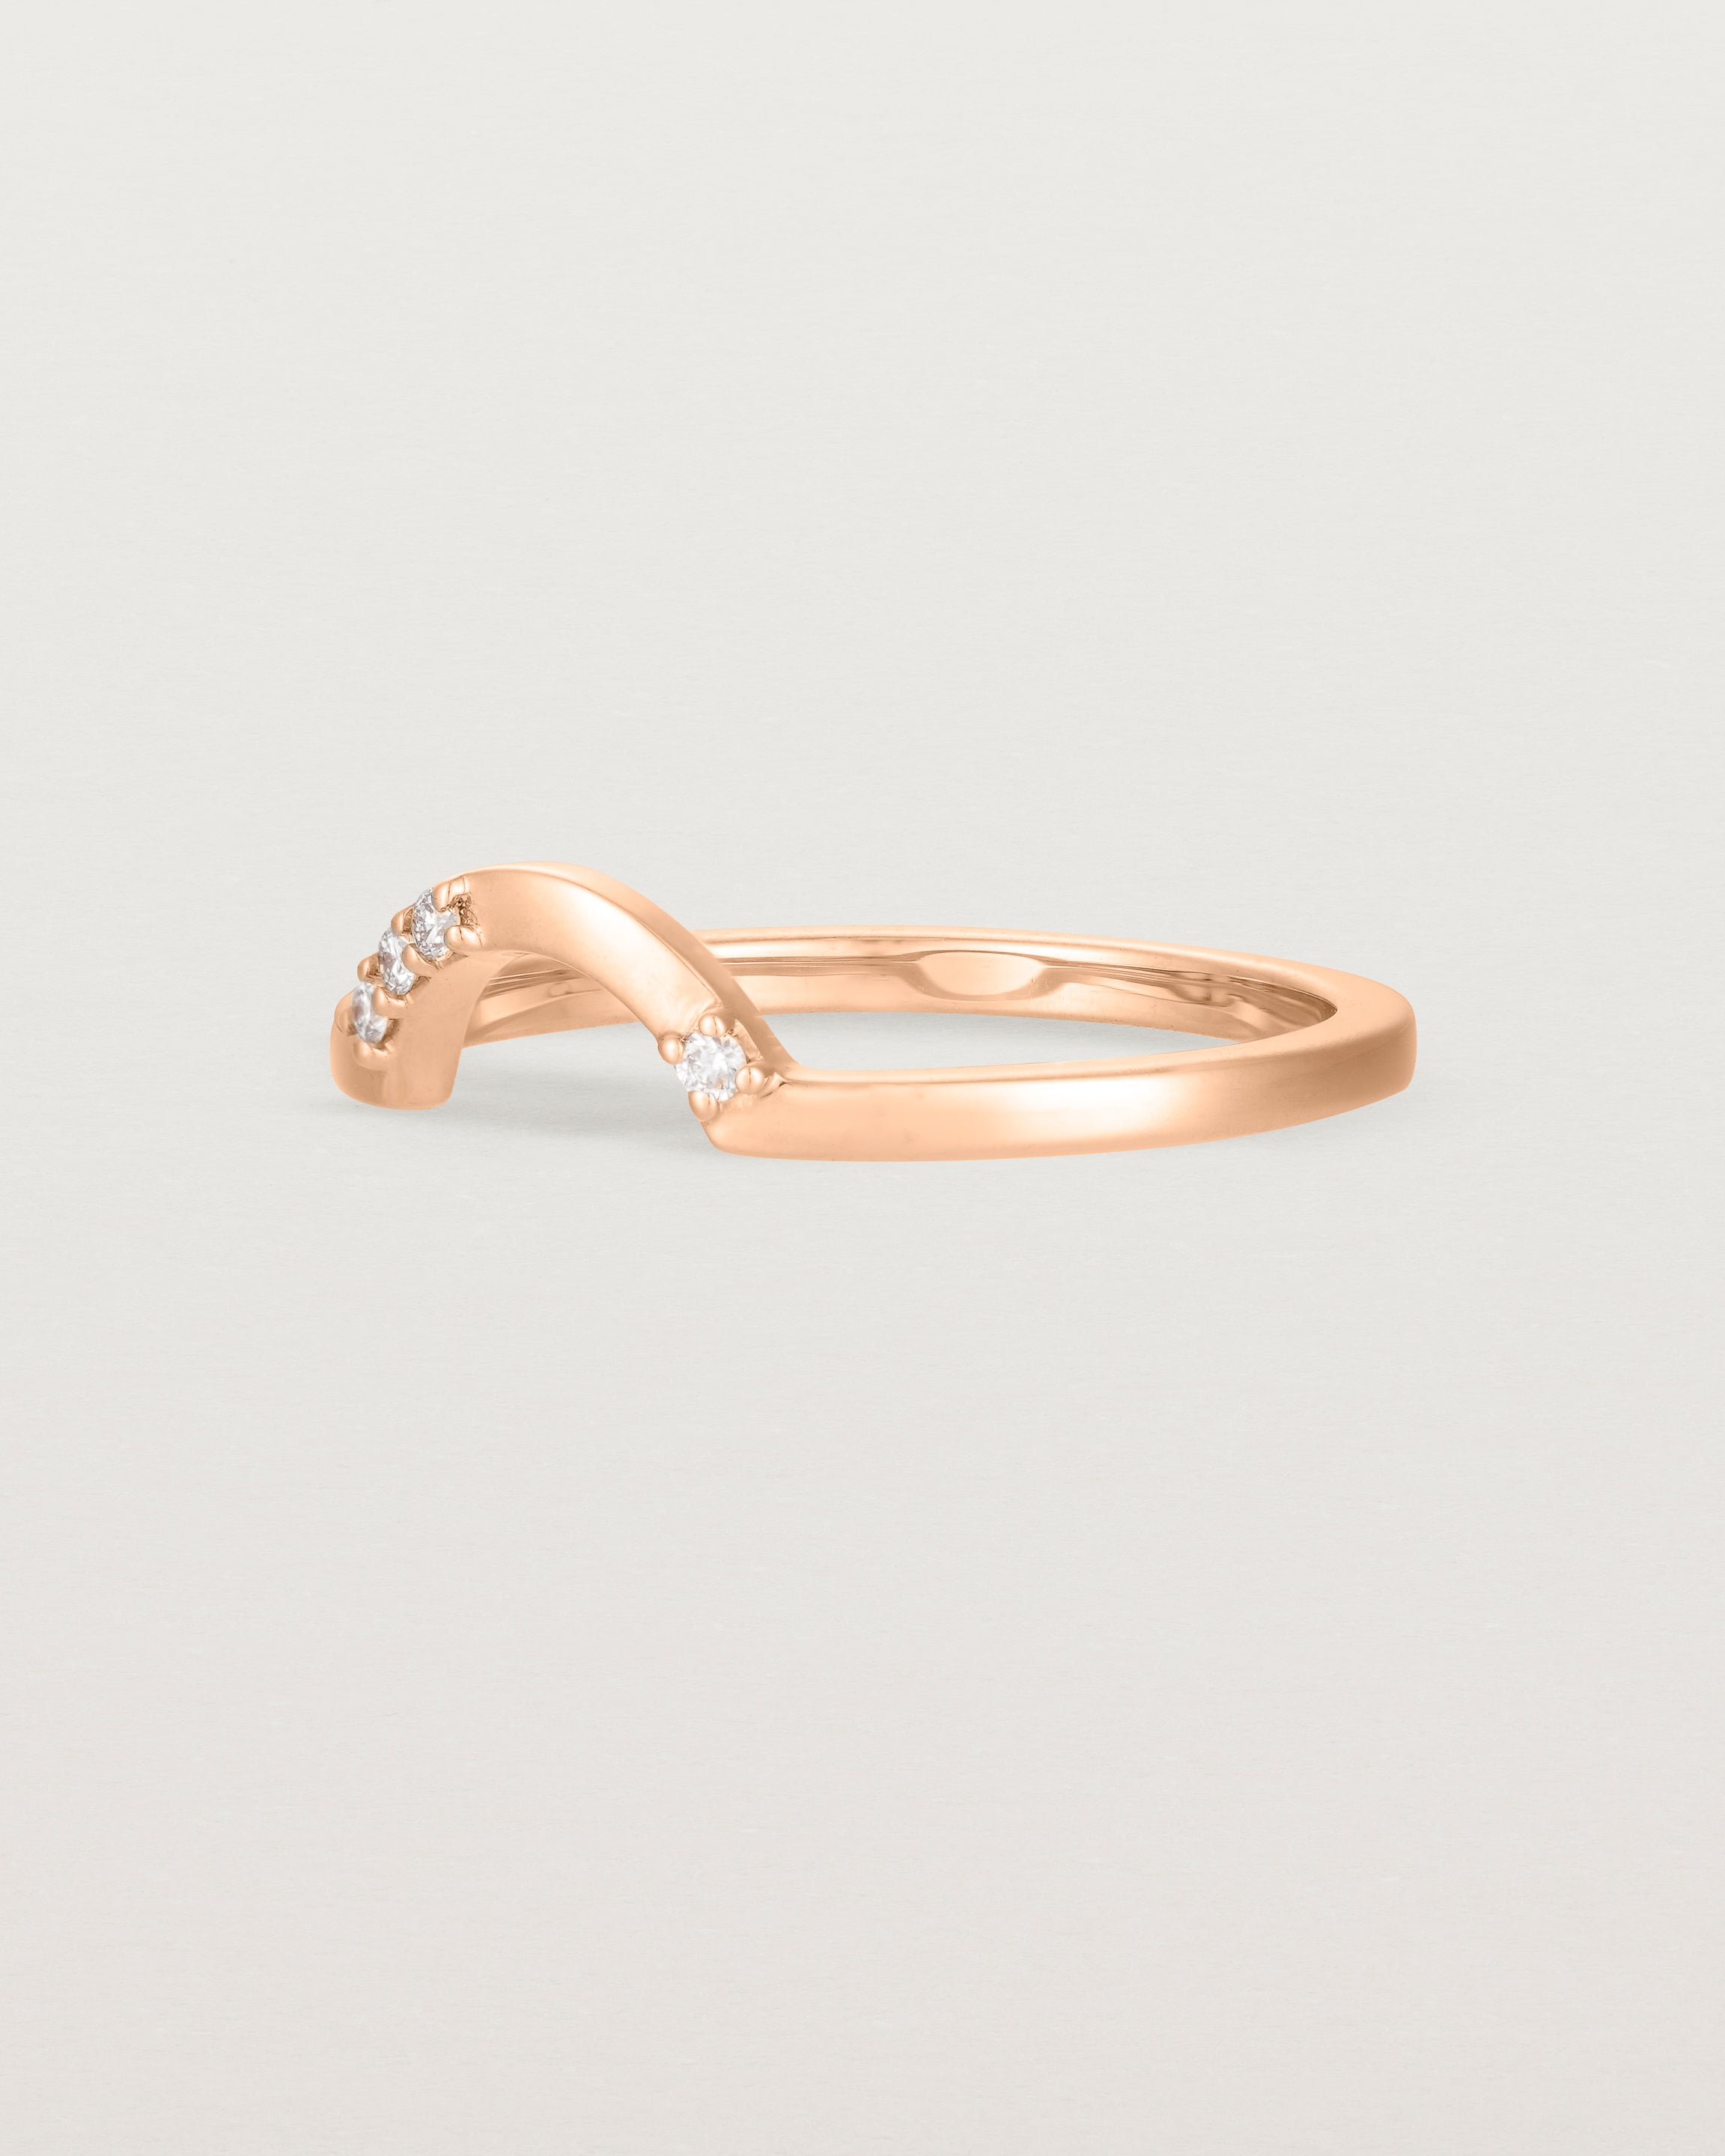 Fit two of a classic small arc crown ring featuring scattered white diamonds, crafted in rose gold